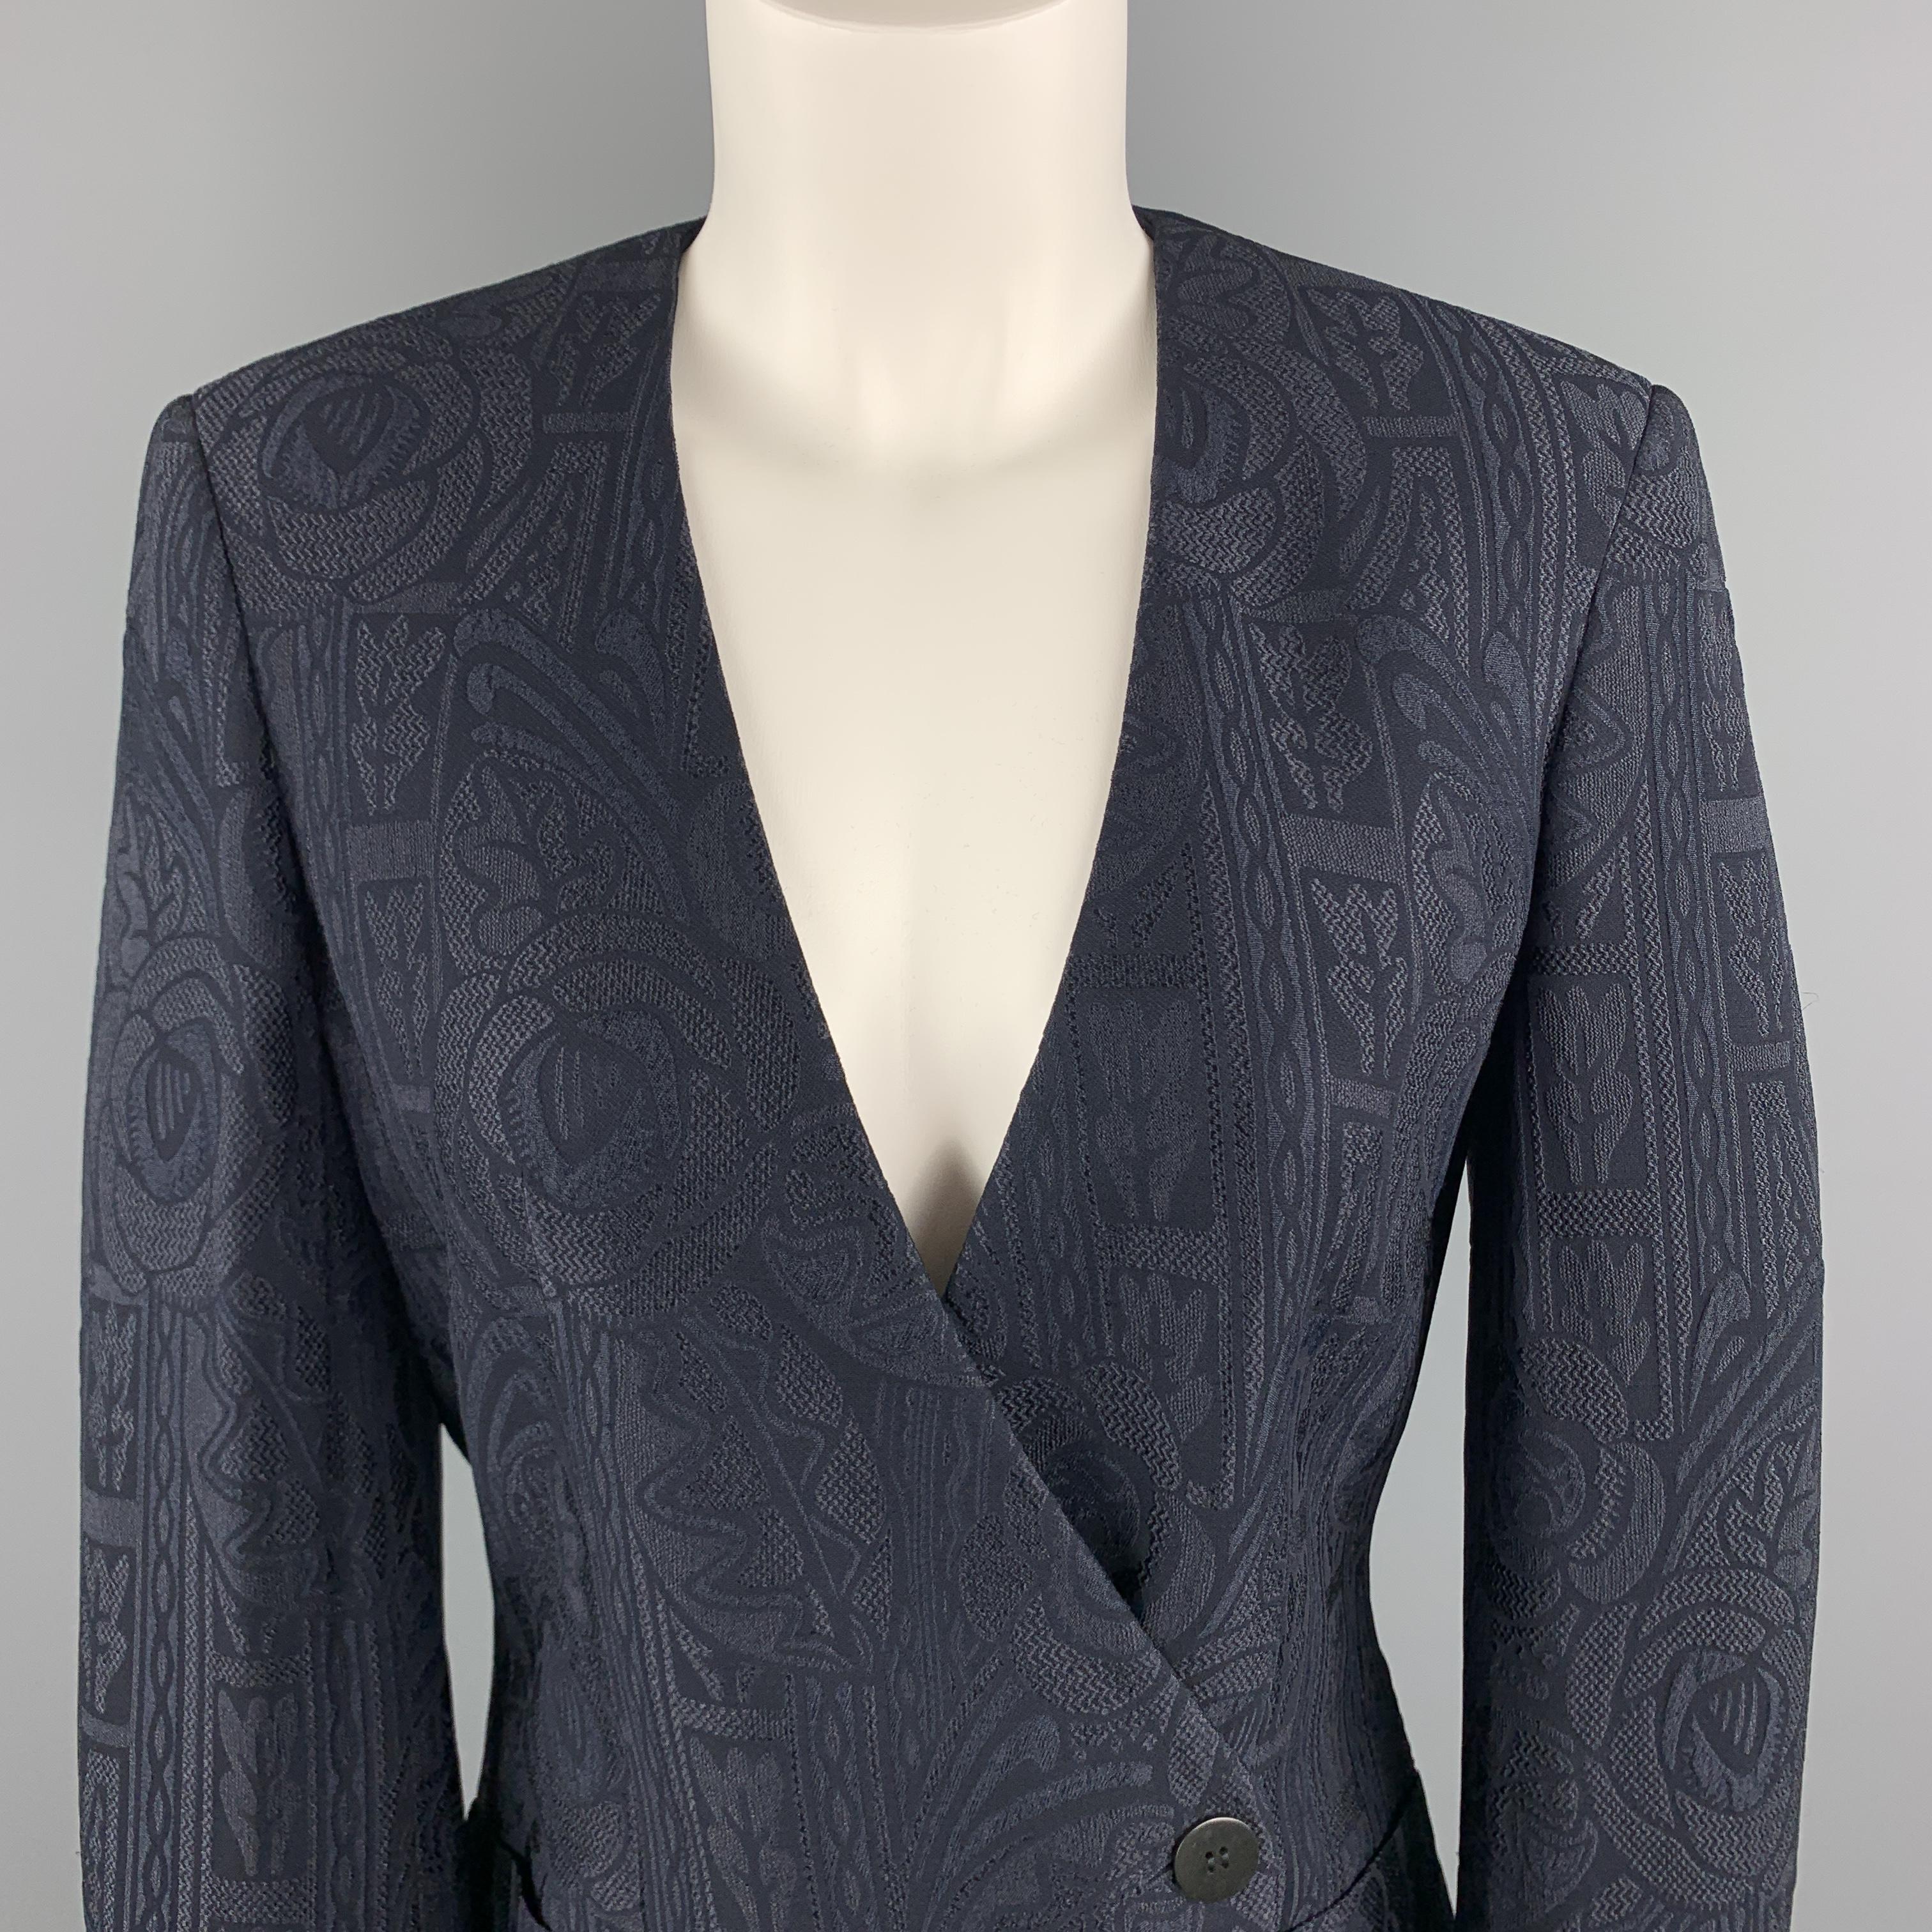 GIORGIO ARMANI blazer comes in navy jacquard with a deep V neck, double breasted button front, and mock pockets. Made in Italy.

Excellent Pre-Owned Condition.
Marked: IT 36

Measurements:

Shoulder: 15.5 in.
Bust: 34 in.
Sleeve: 23.5 in.
Length: 28